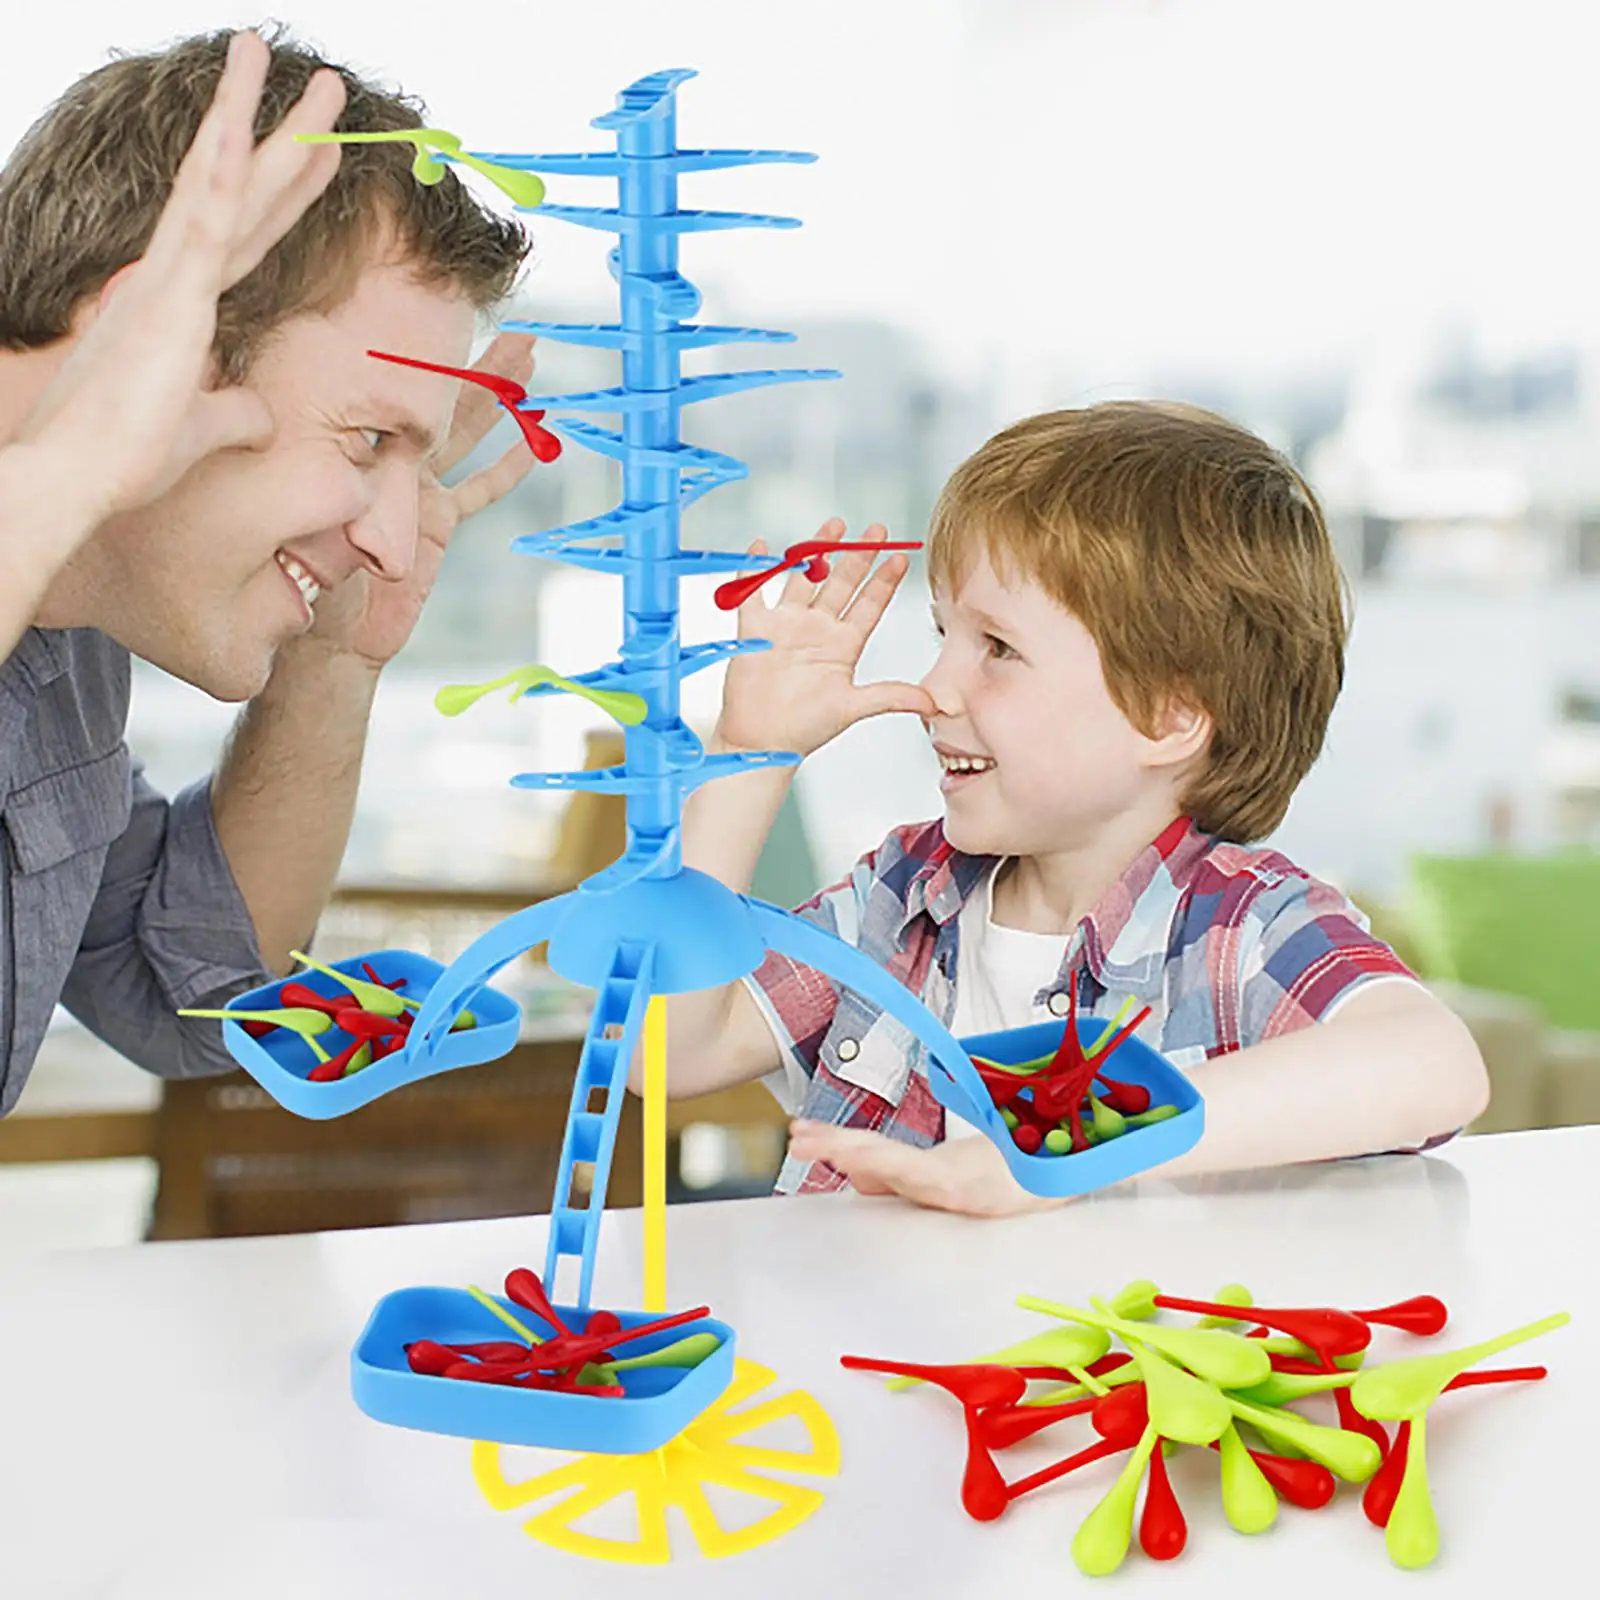 Gravity Balancing Bird Toy for Kids ,Play It Any Time Anywhere Multicolored